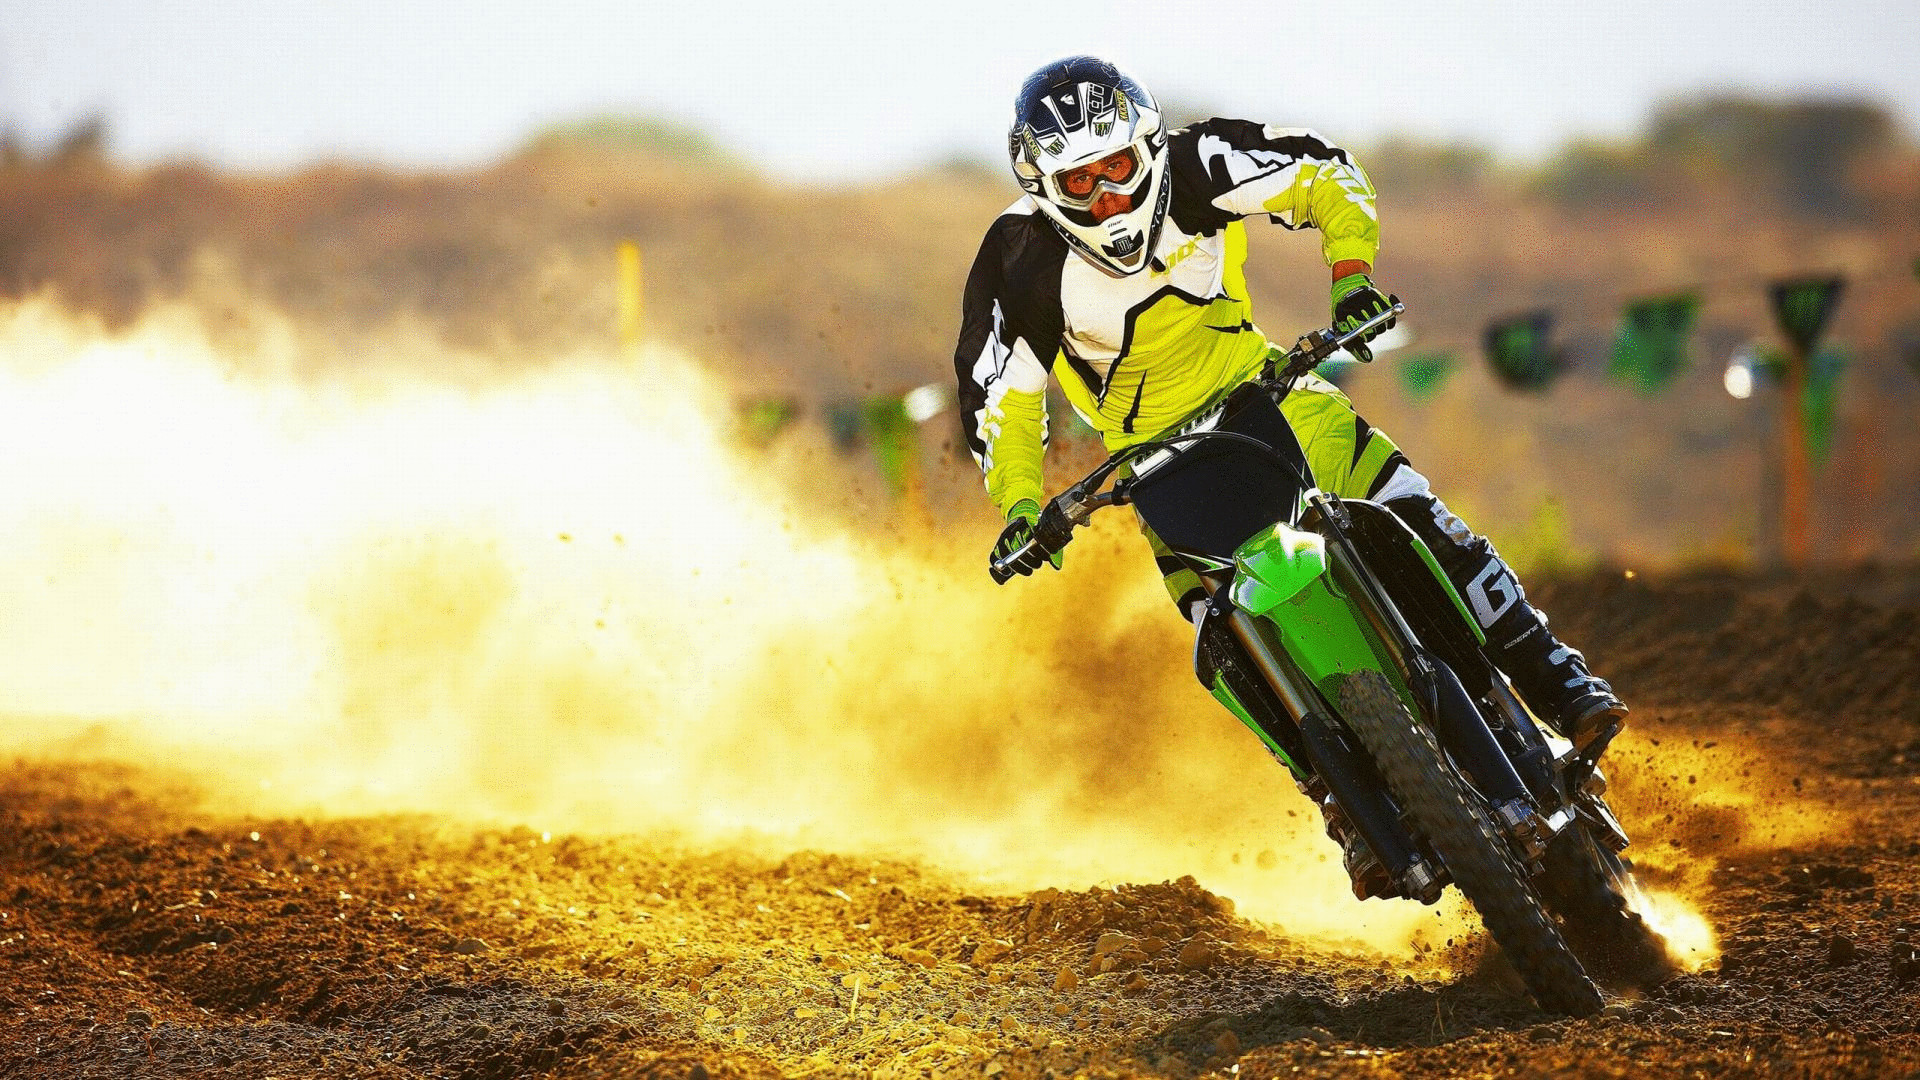 1920x1080 104 Motocross HD Wallpapers | Backgrounds - Wallpaper Abyss